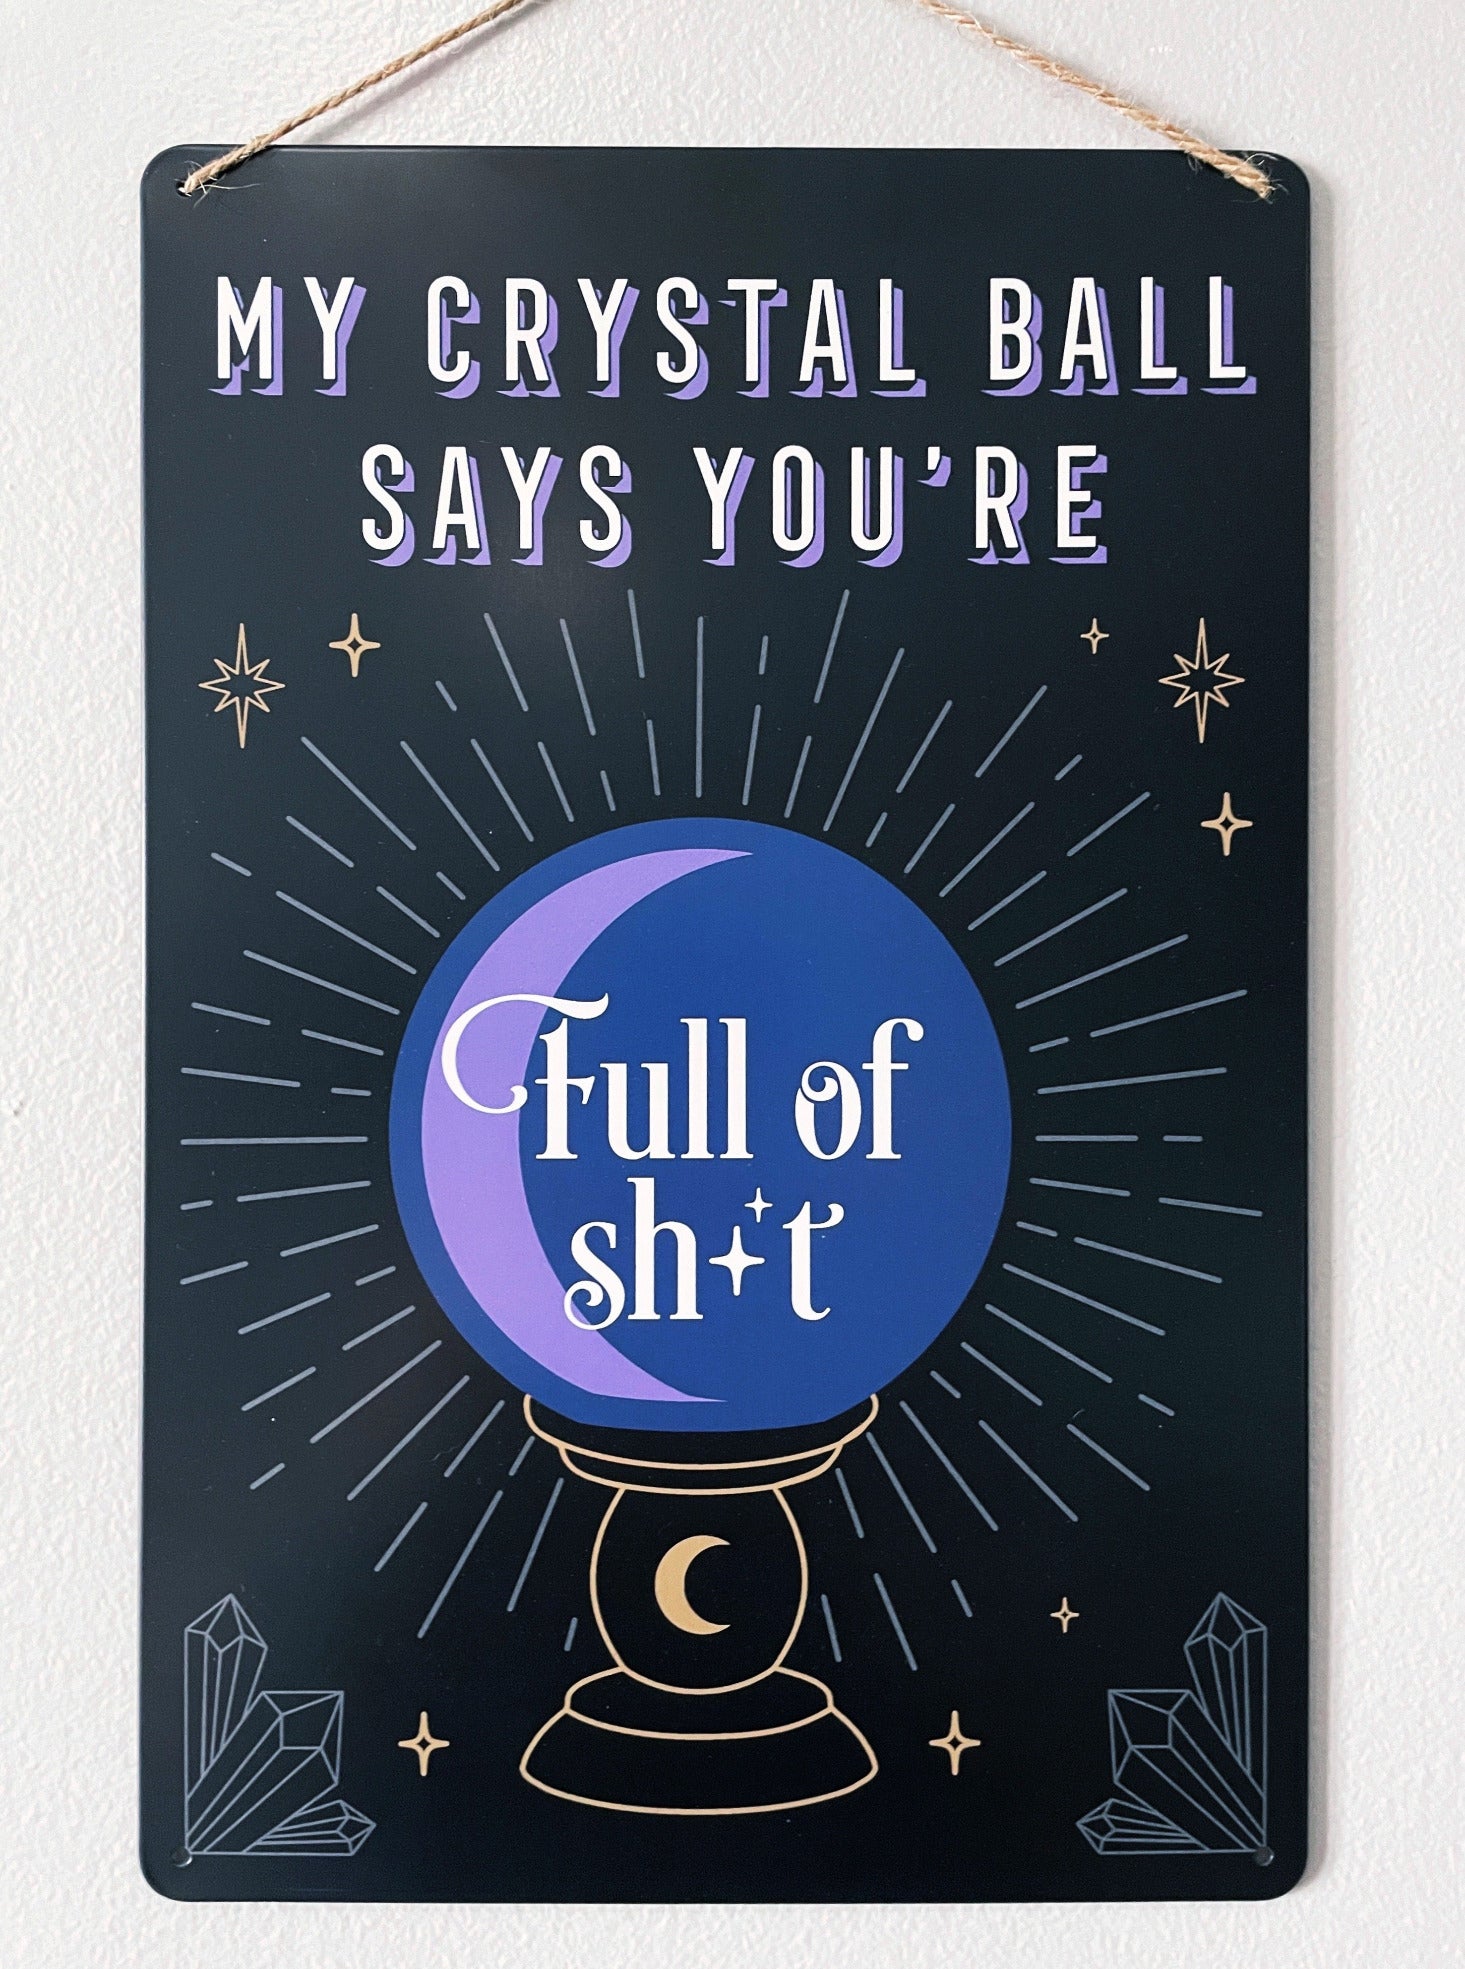 An image of a metal wall sign featuring a crystal ball design with the phrase "My crystal ball says you're full of shit" written in bold letters. The crystal ball design is illustrated in white against a deep purple background, with intricate lines and details that create a mystical and magical look.